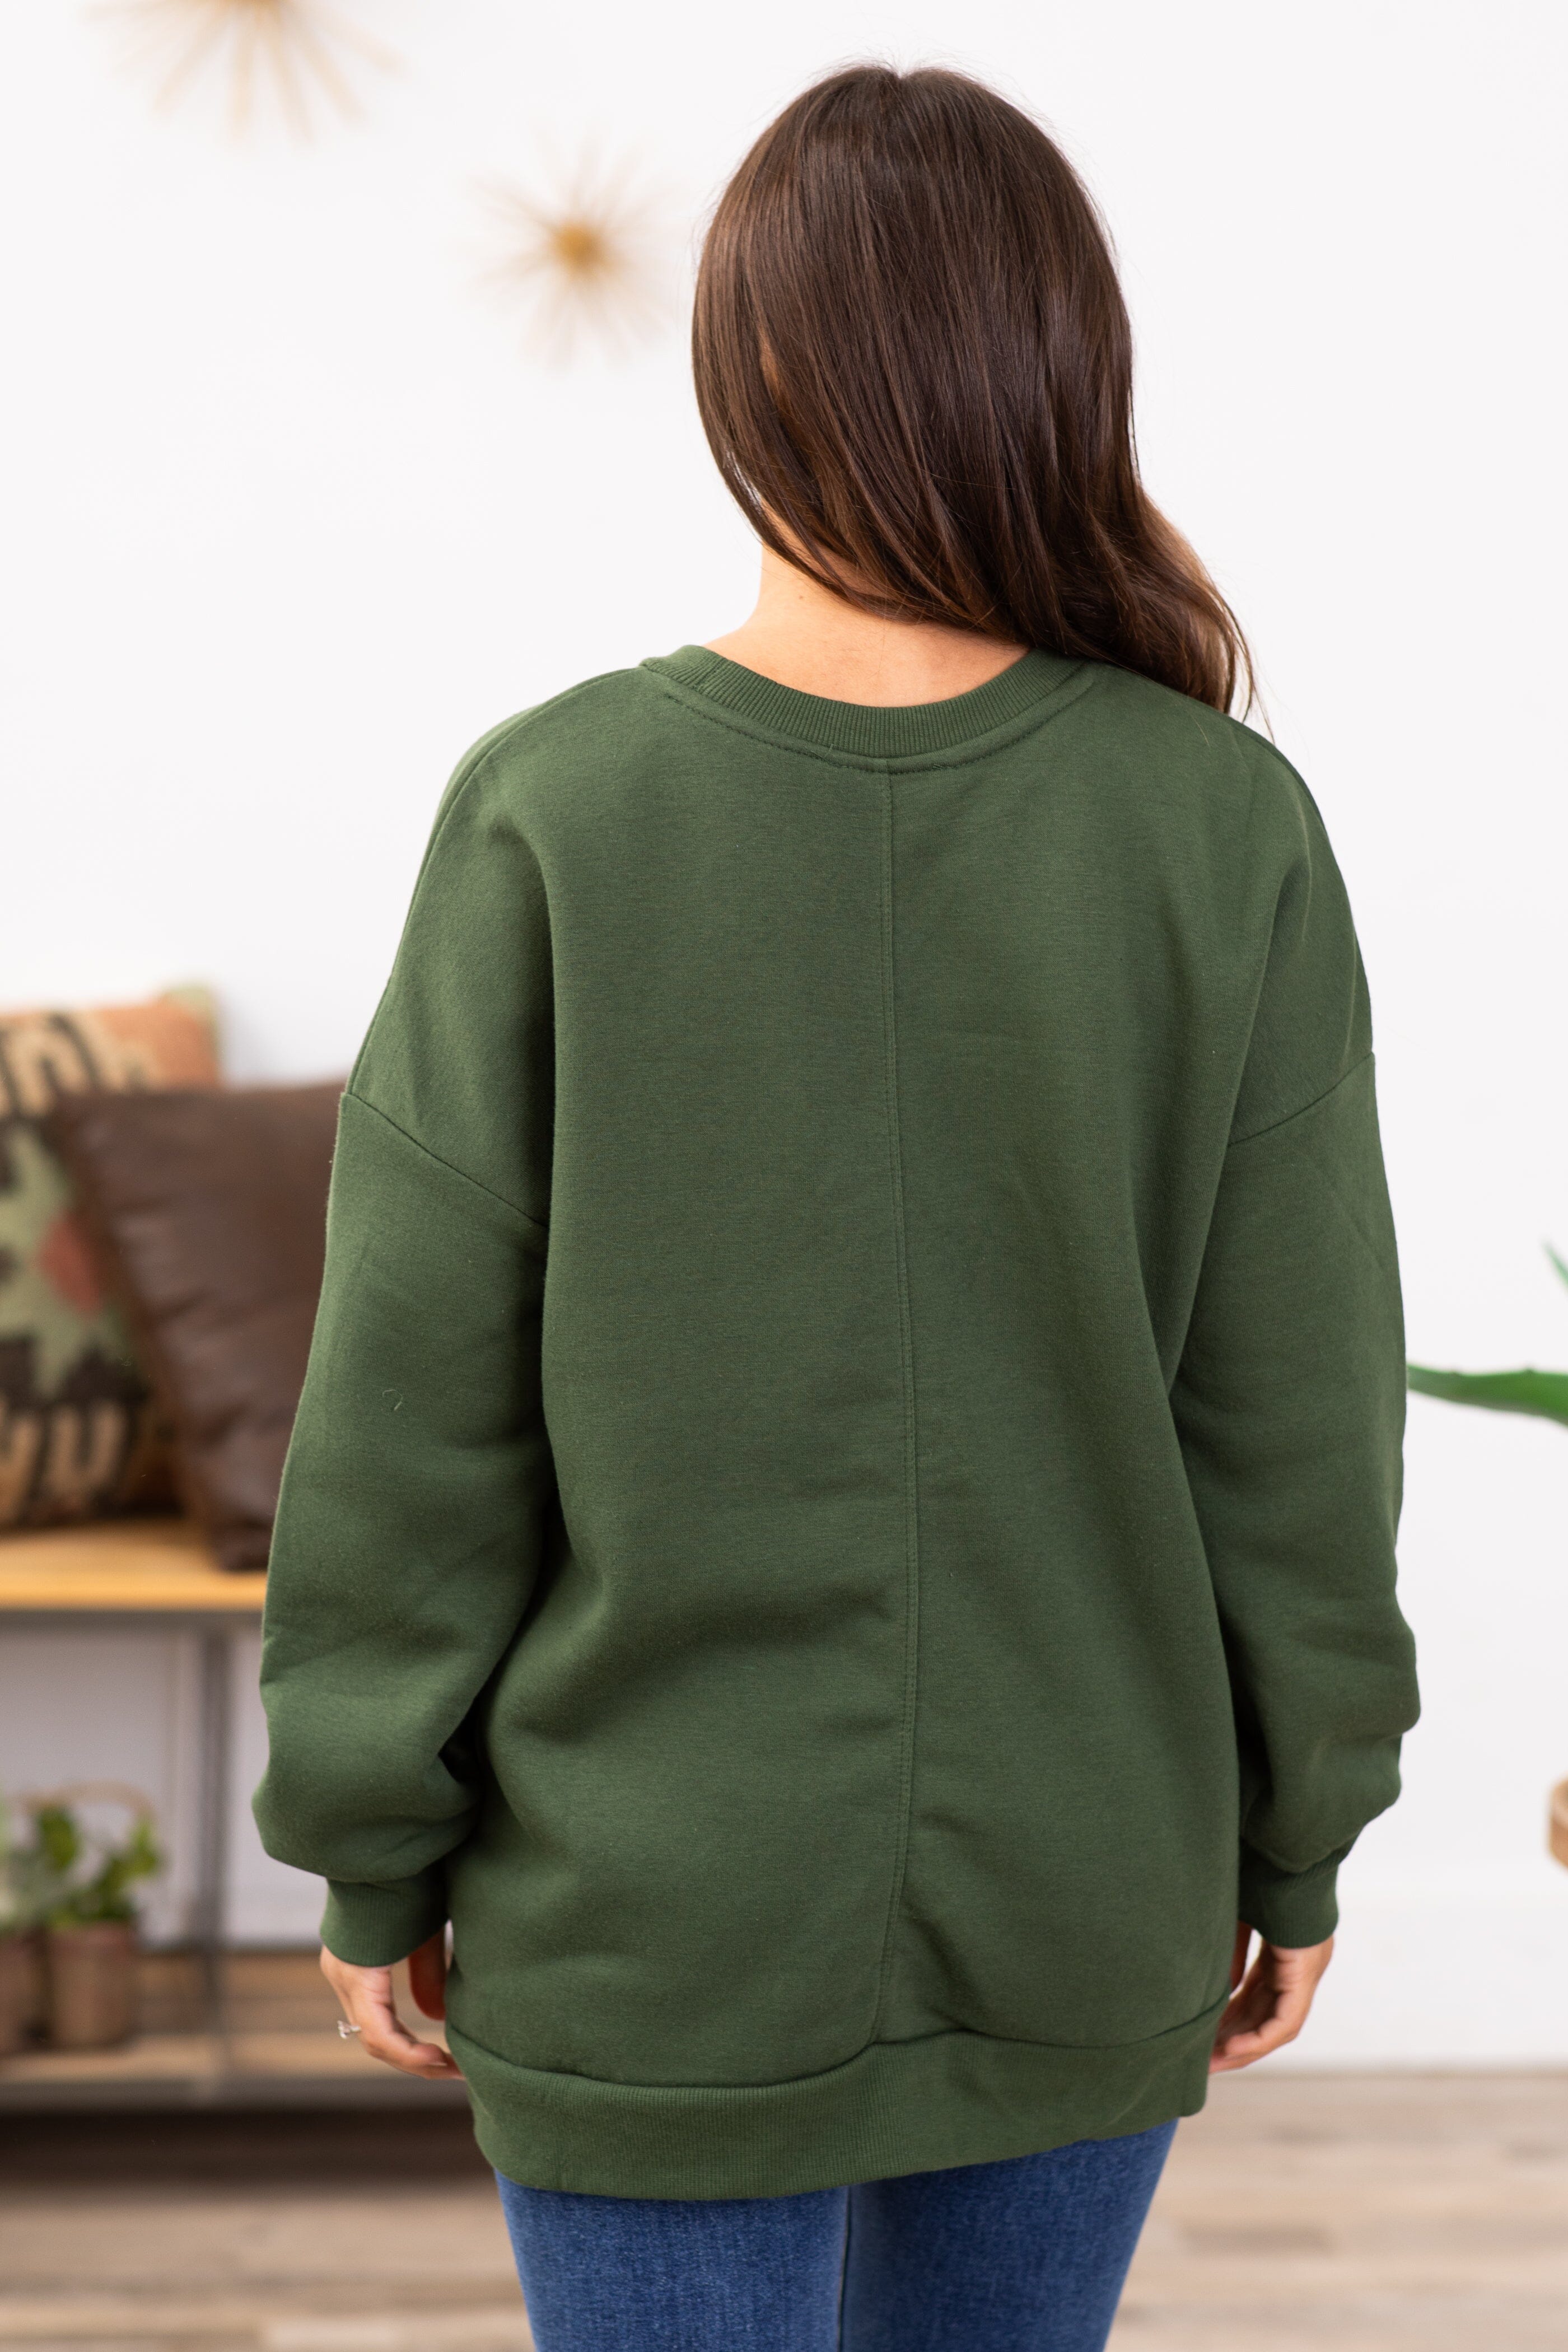 Hunter Green Crew Neck Sweatshirt With Pockets - Filly Flair